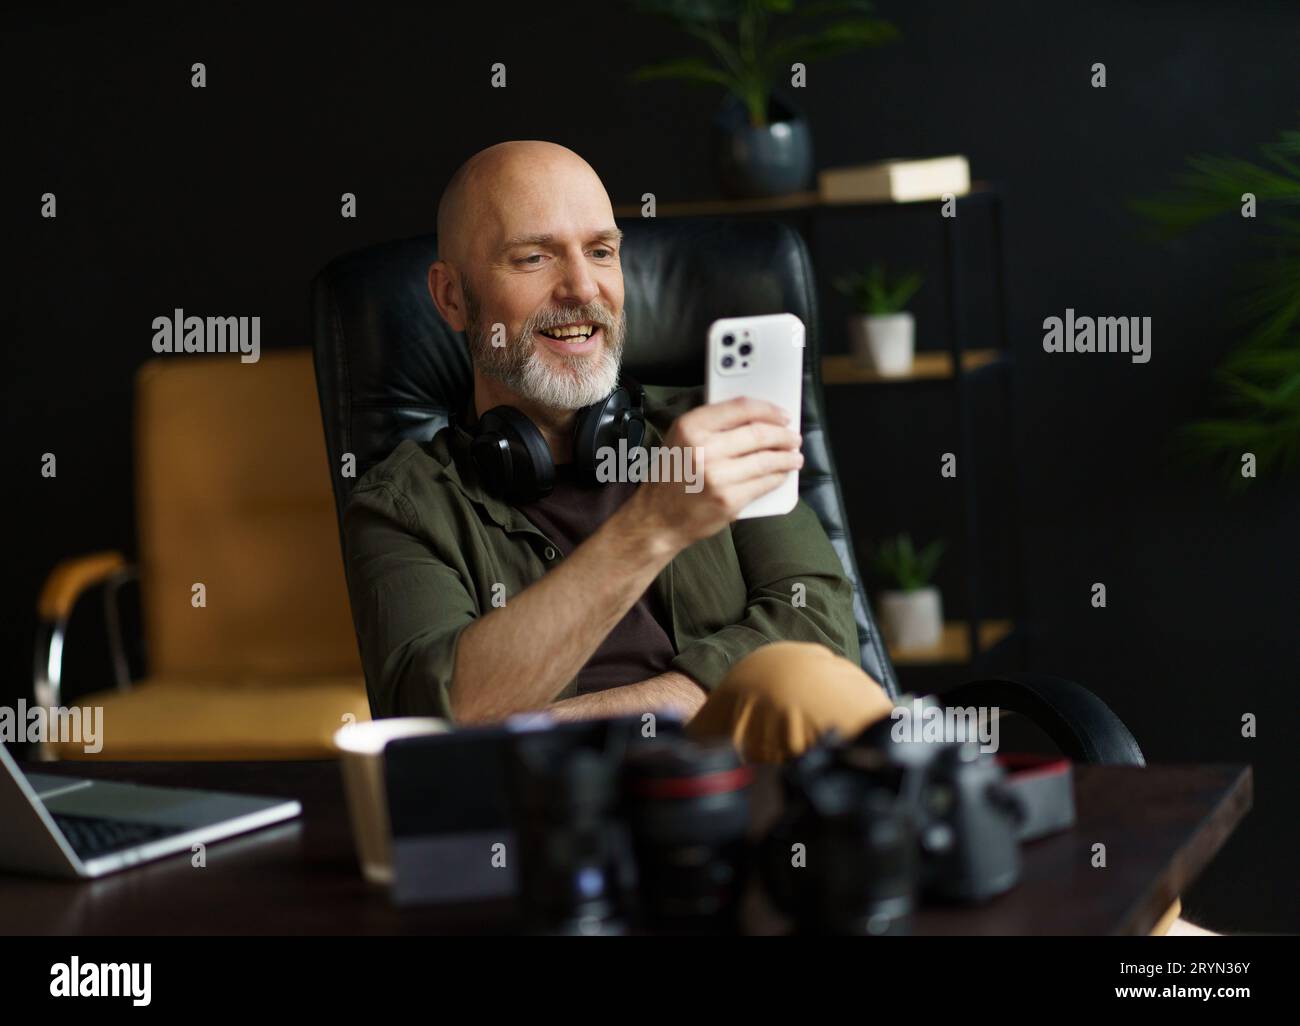 Mid aged man with bald head and silver beard engrossed in reading news on mobile phone. With laptop placed on desk in background Stock Photo